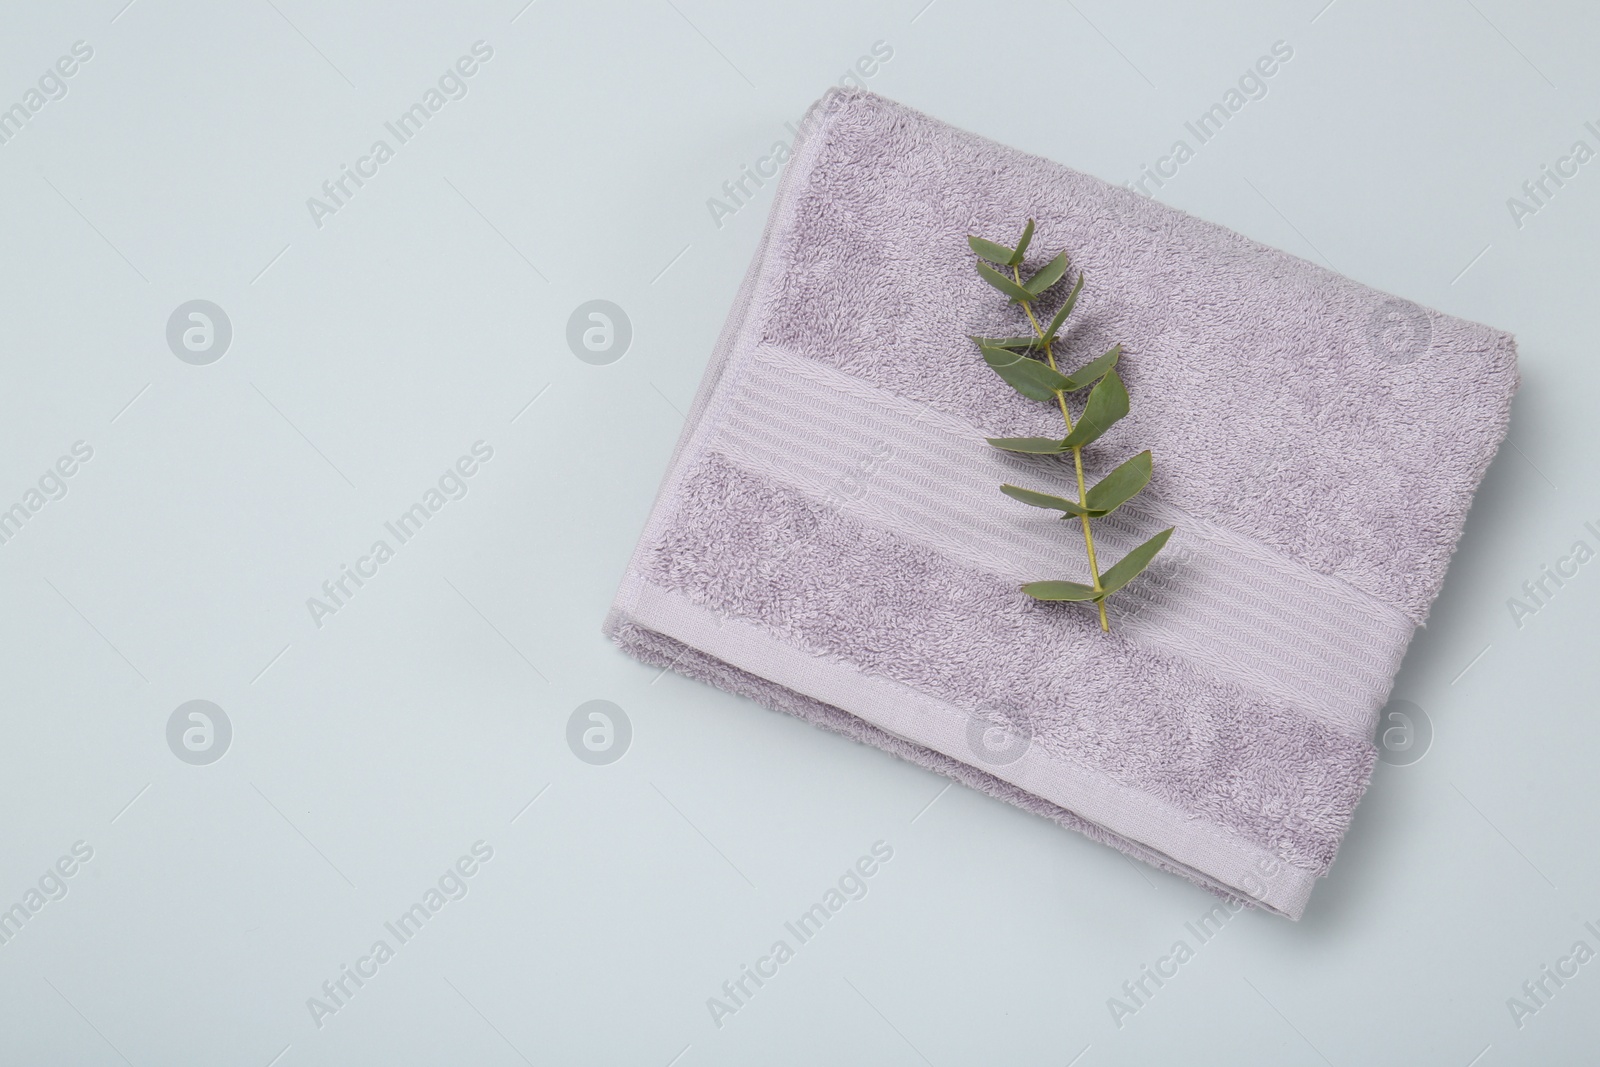 Photo of Violet terry towel and eucalyptus branch on light grey background, top view. Space for text